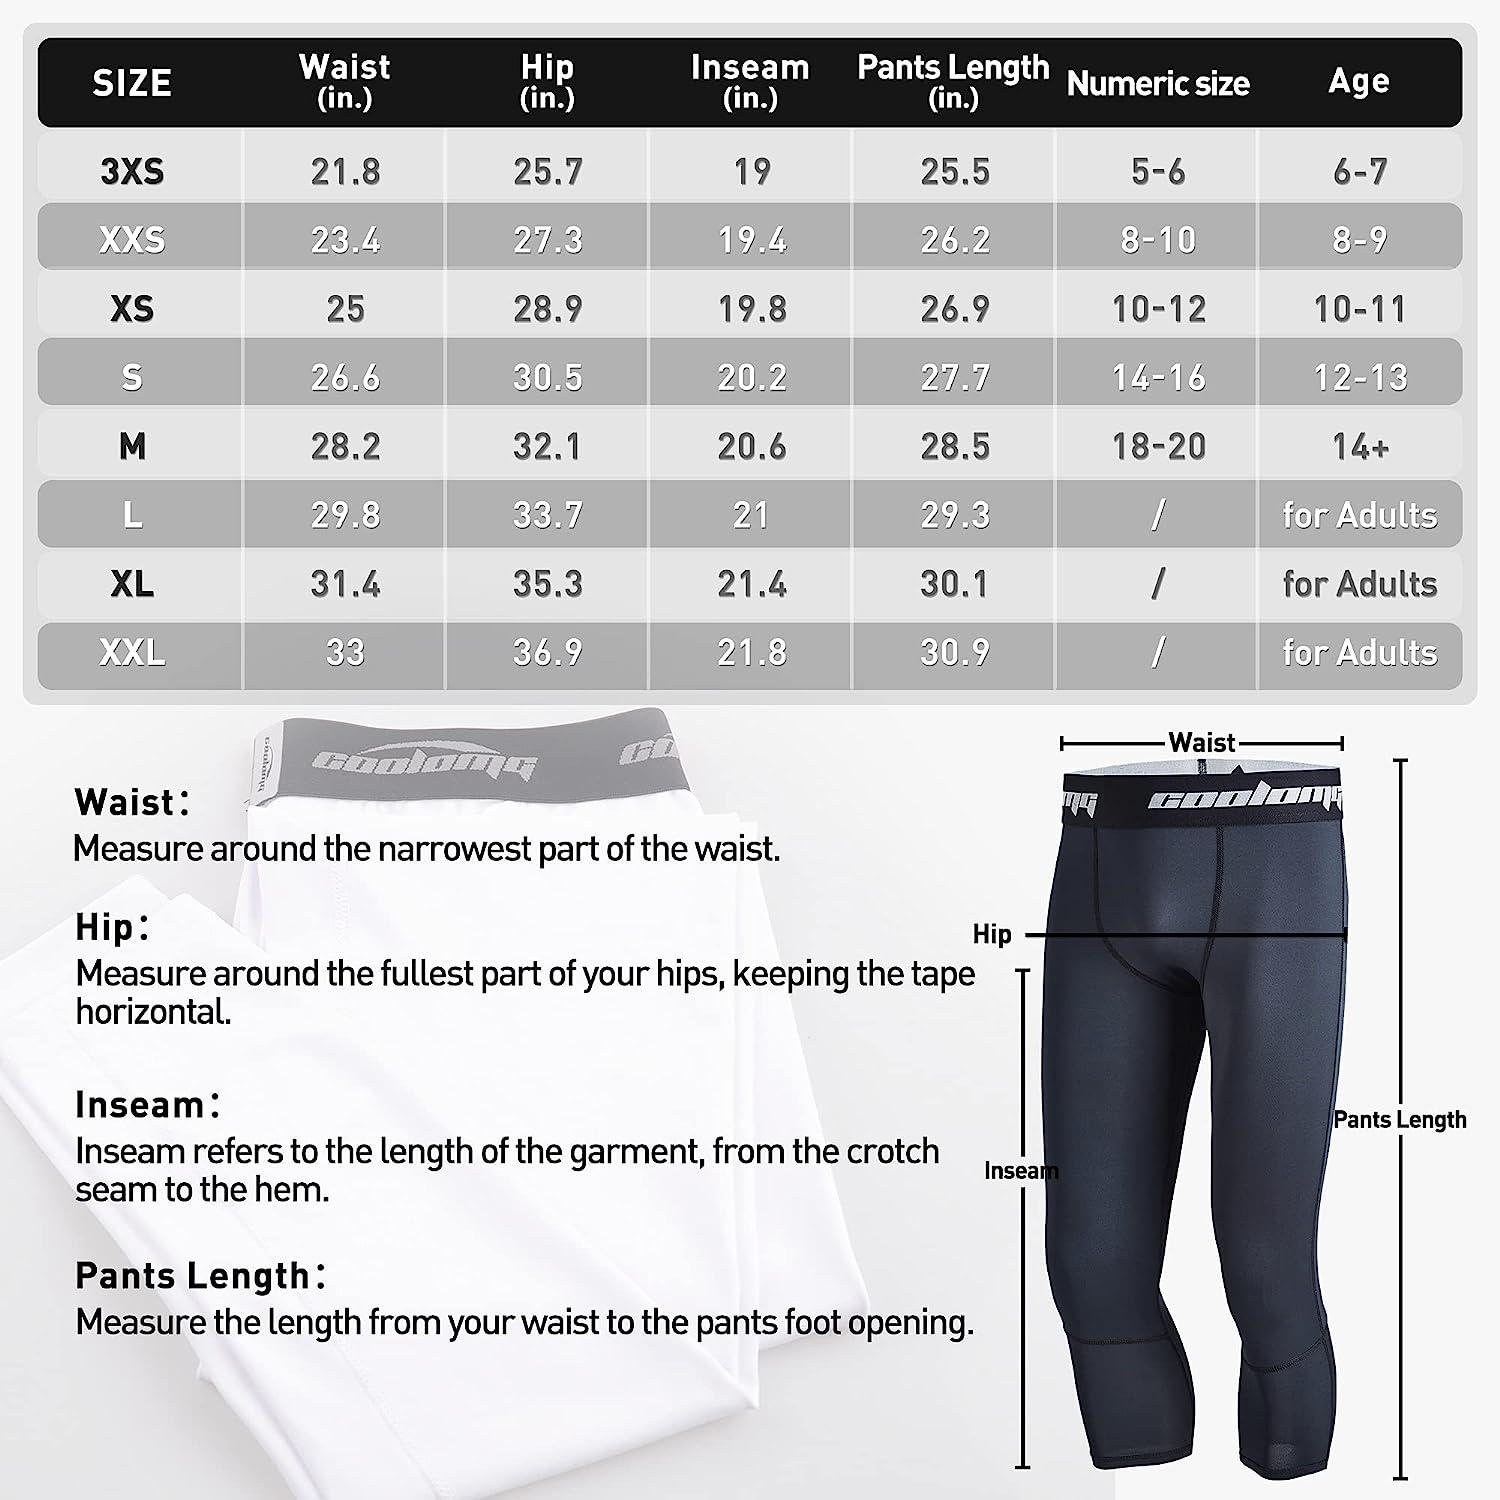 COOLOMG Youth Boys Compression Pants 3/4 Basketball Baselayer Sports Tights  Running Training Leggings Capris White X-Large